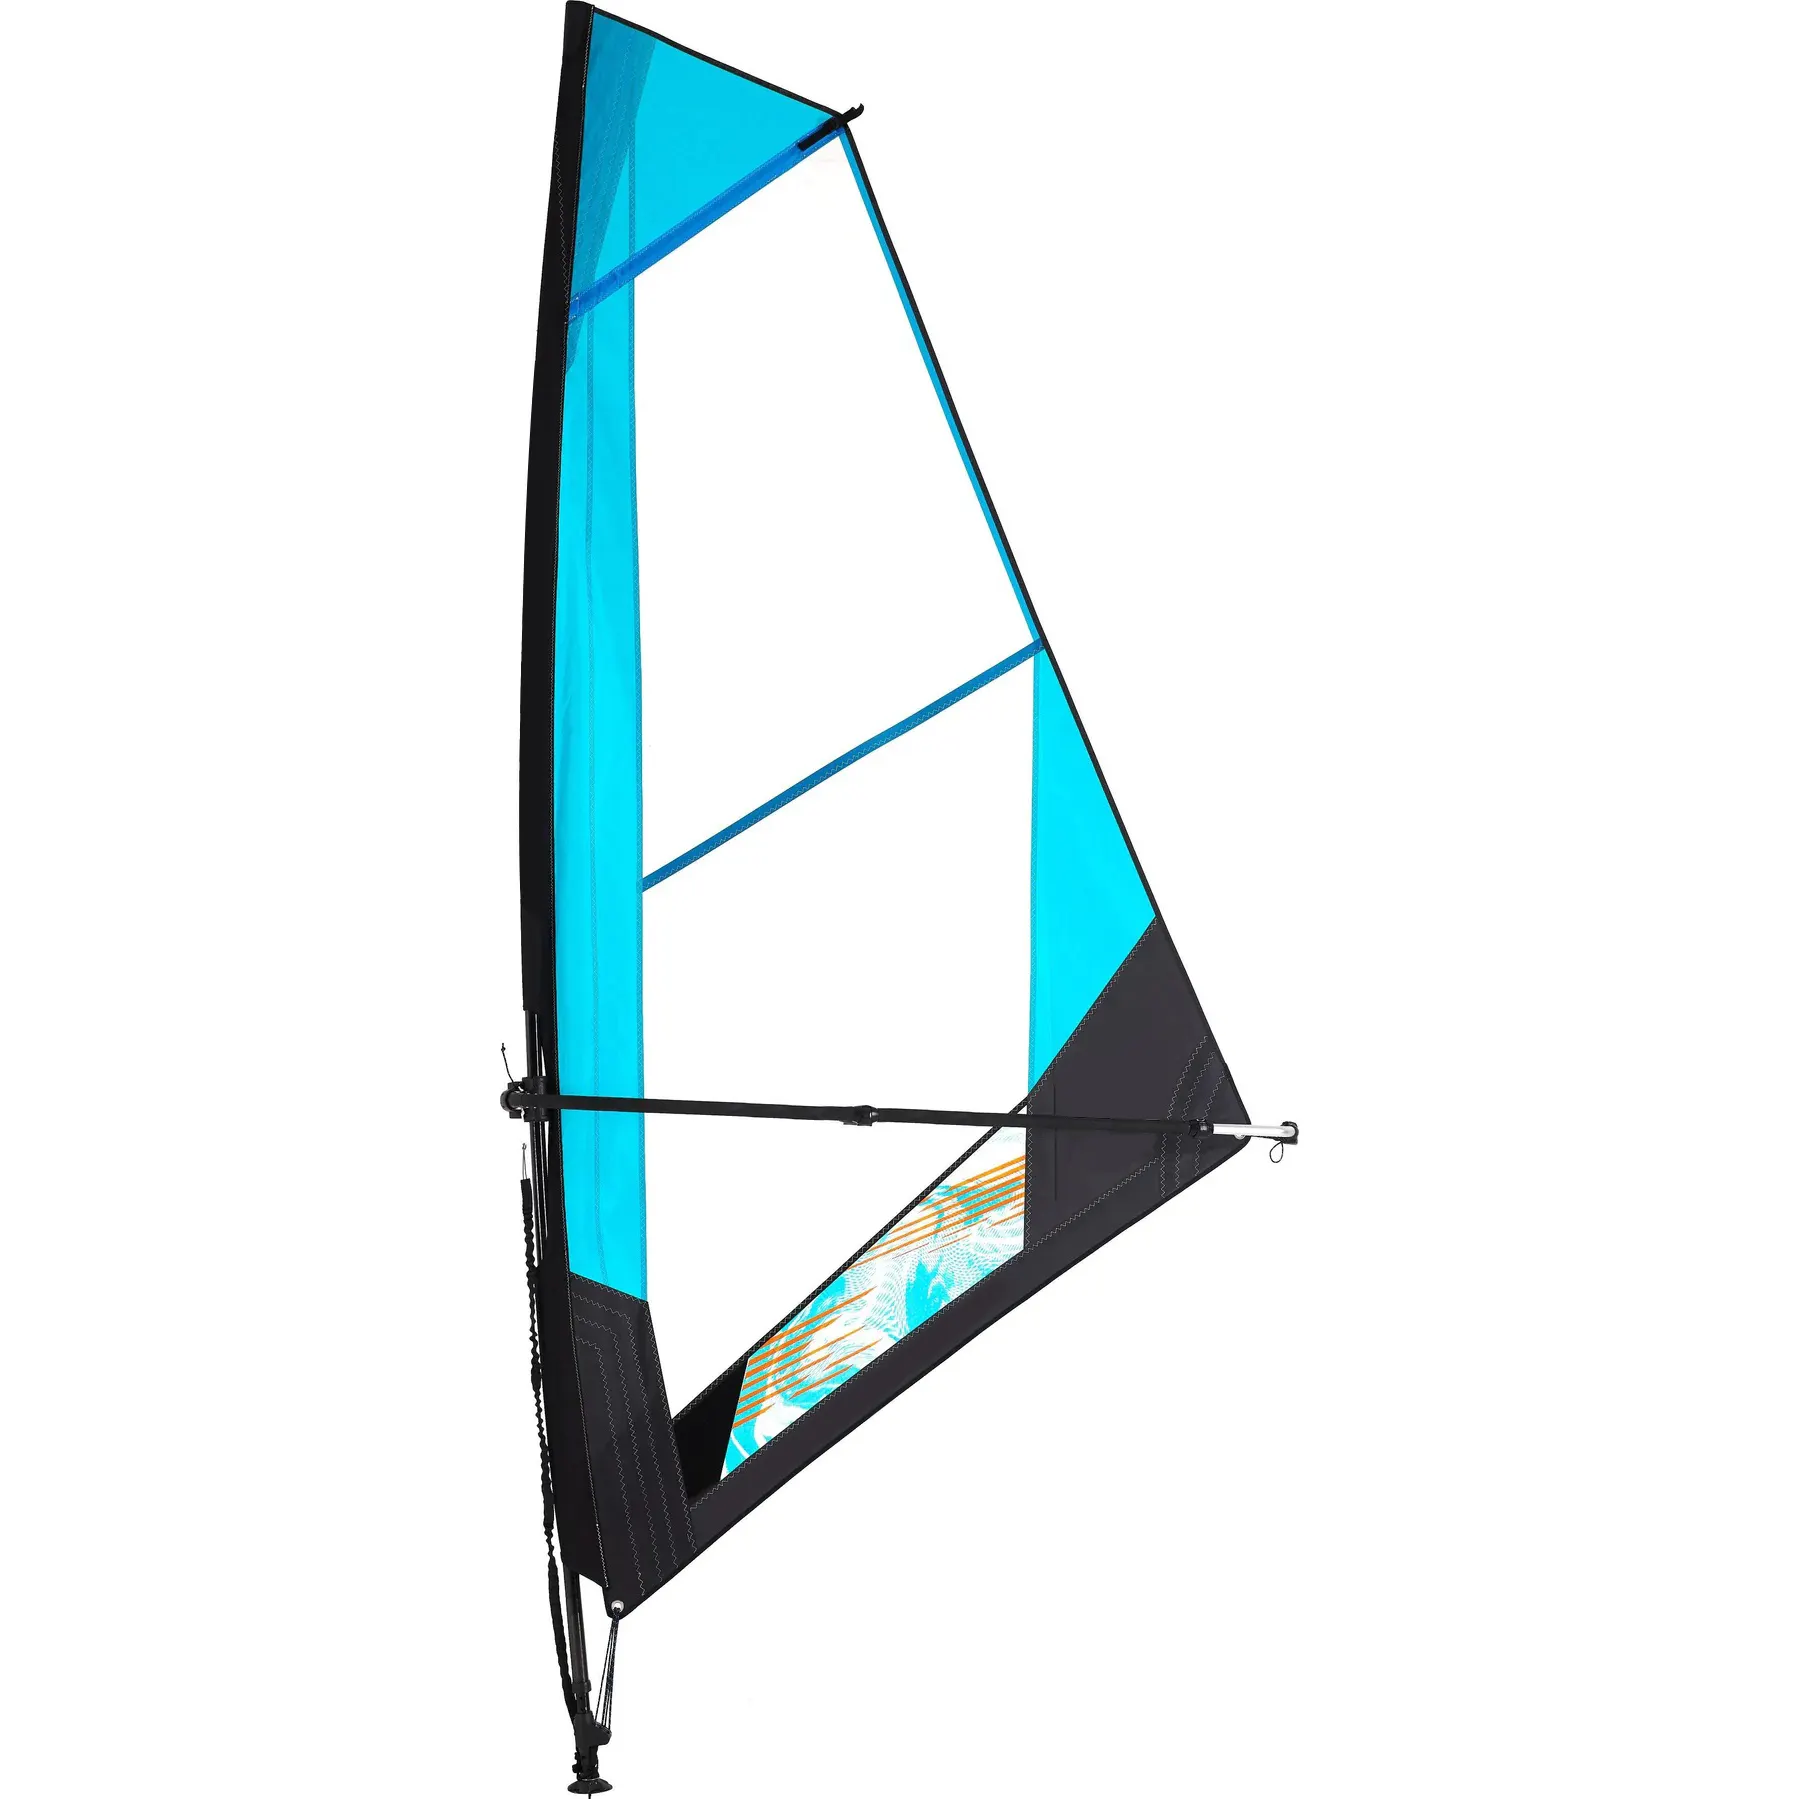 Inflatable catamaran sailboat the world's favorite portable sail boat light fast  10 and 14 inch models with 3.75 4.1 sail